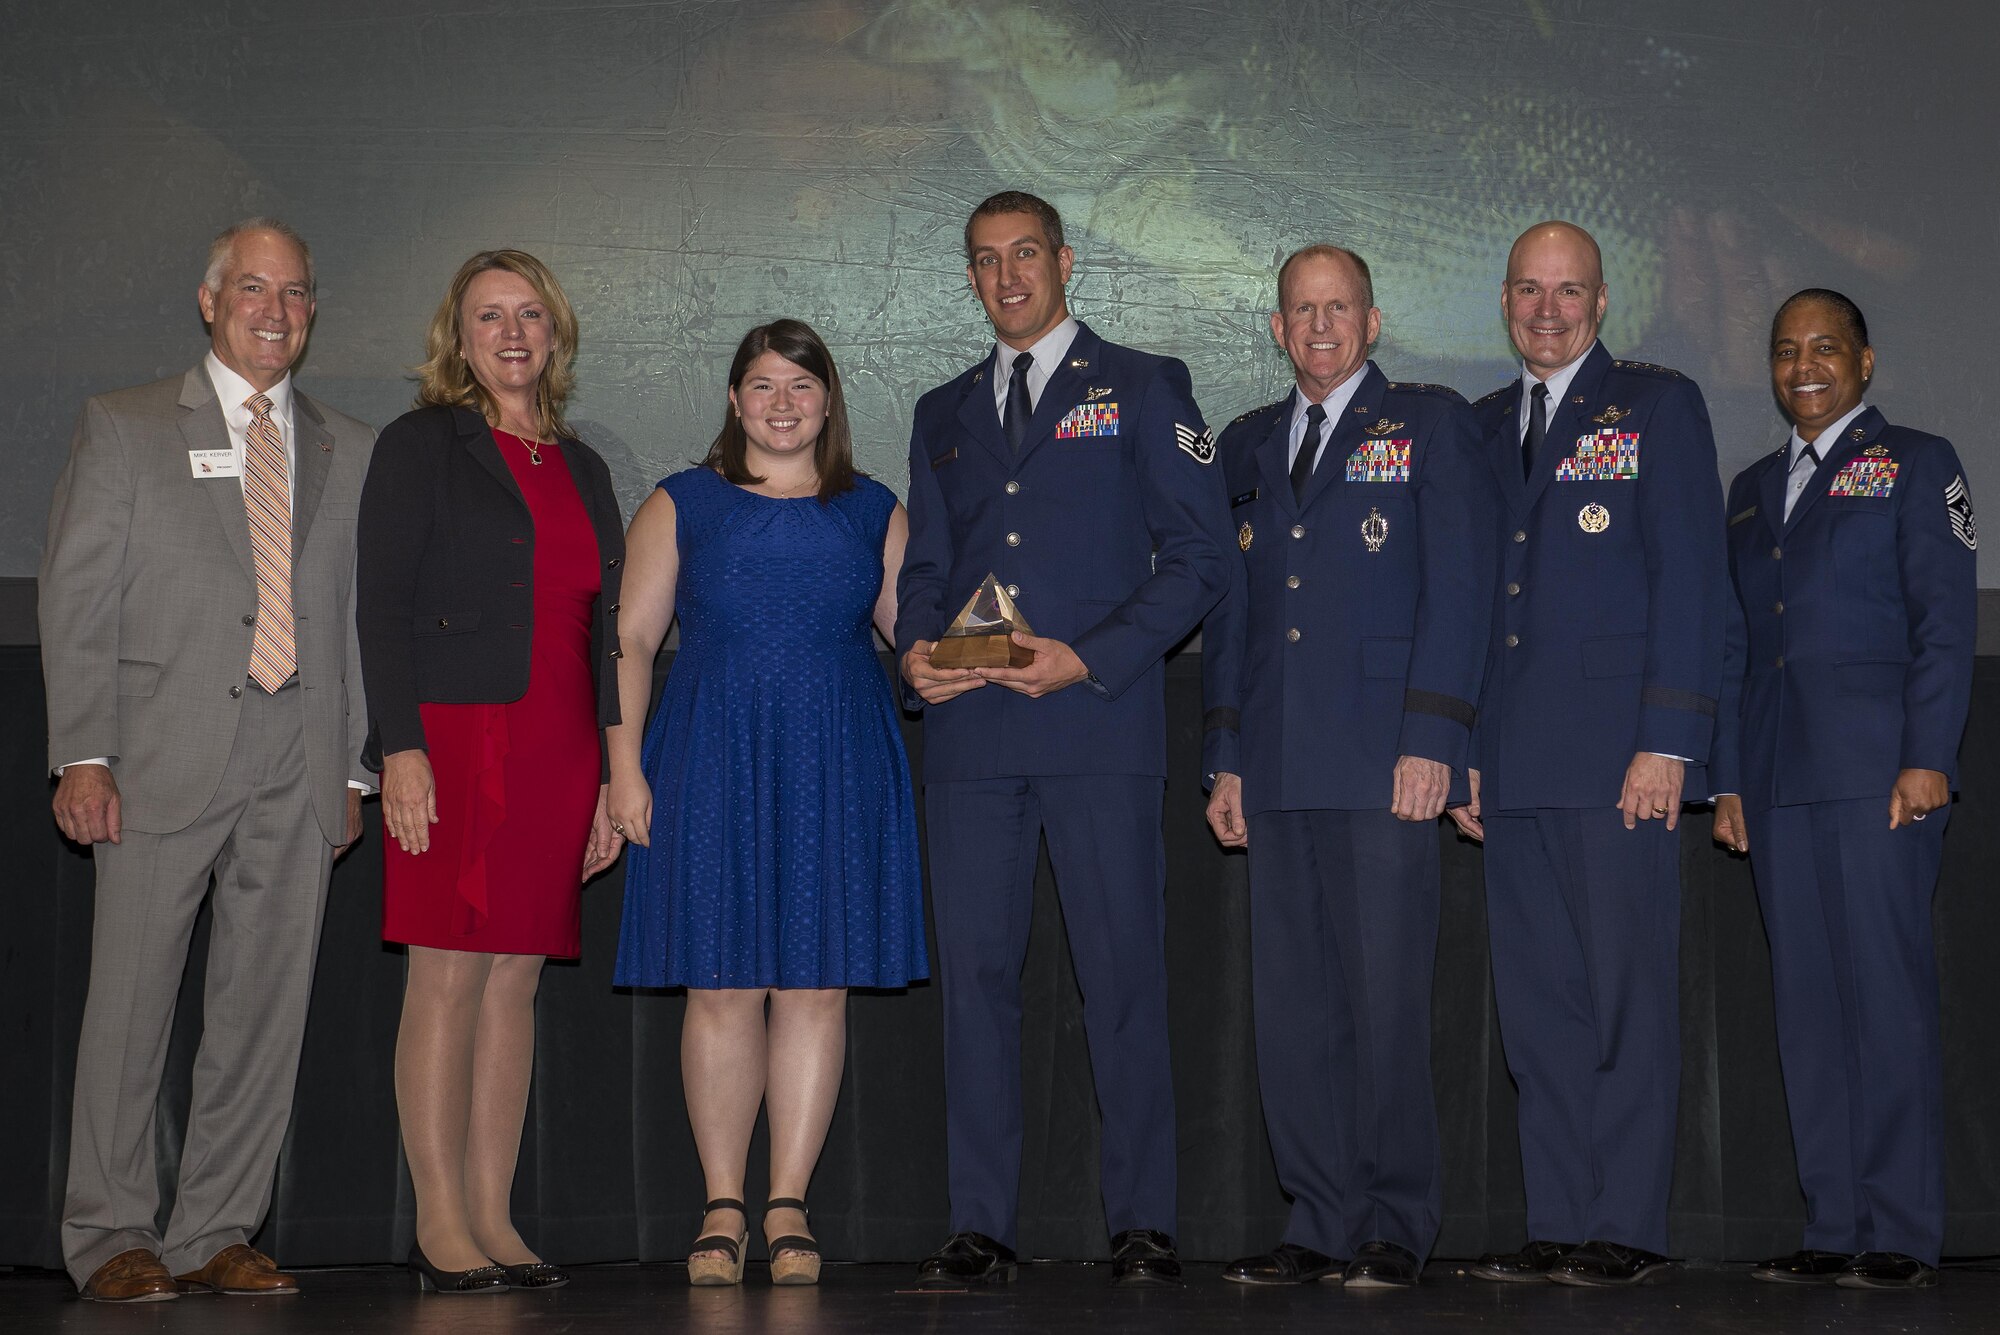 U.S. Air Force Staff Sgt. Gregory Marquardt, 62nd Airlift Squadron standardization and evaluation liason/C-130J formal training unit instructor loadmaster, receives the General Dutch Huyser Outstanding Aircrew Member Award at the annual Airlift/Tanker Association conference held Oct. 27 - 30, 2016 at Nashville, Tenn.  The ATA recognizes Air Force active-duty, Reserve and retired personnel (officer and enlisted), as well as industrial support and civilians throughout the air mobility mission. (Courtesy Photo)